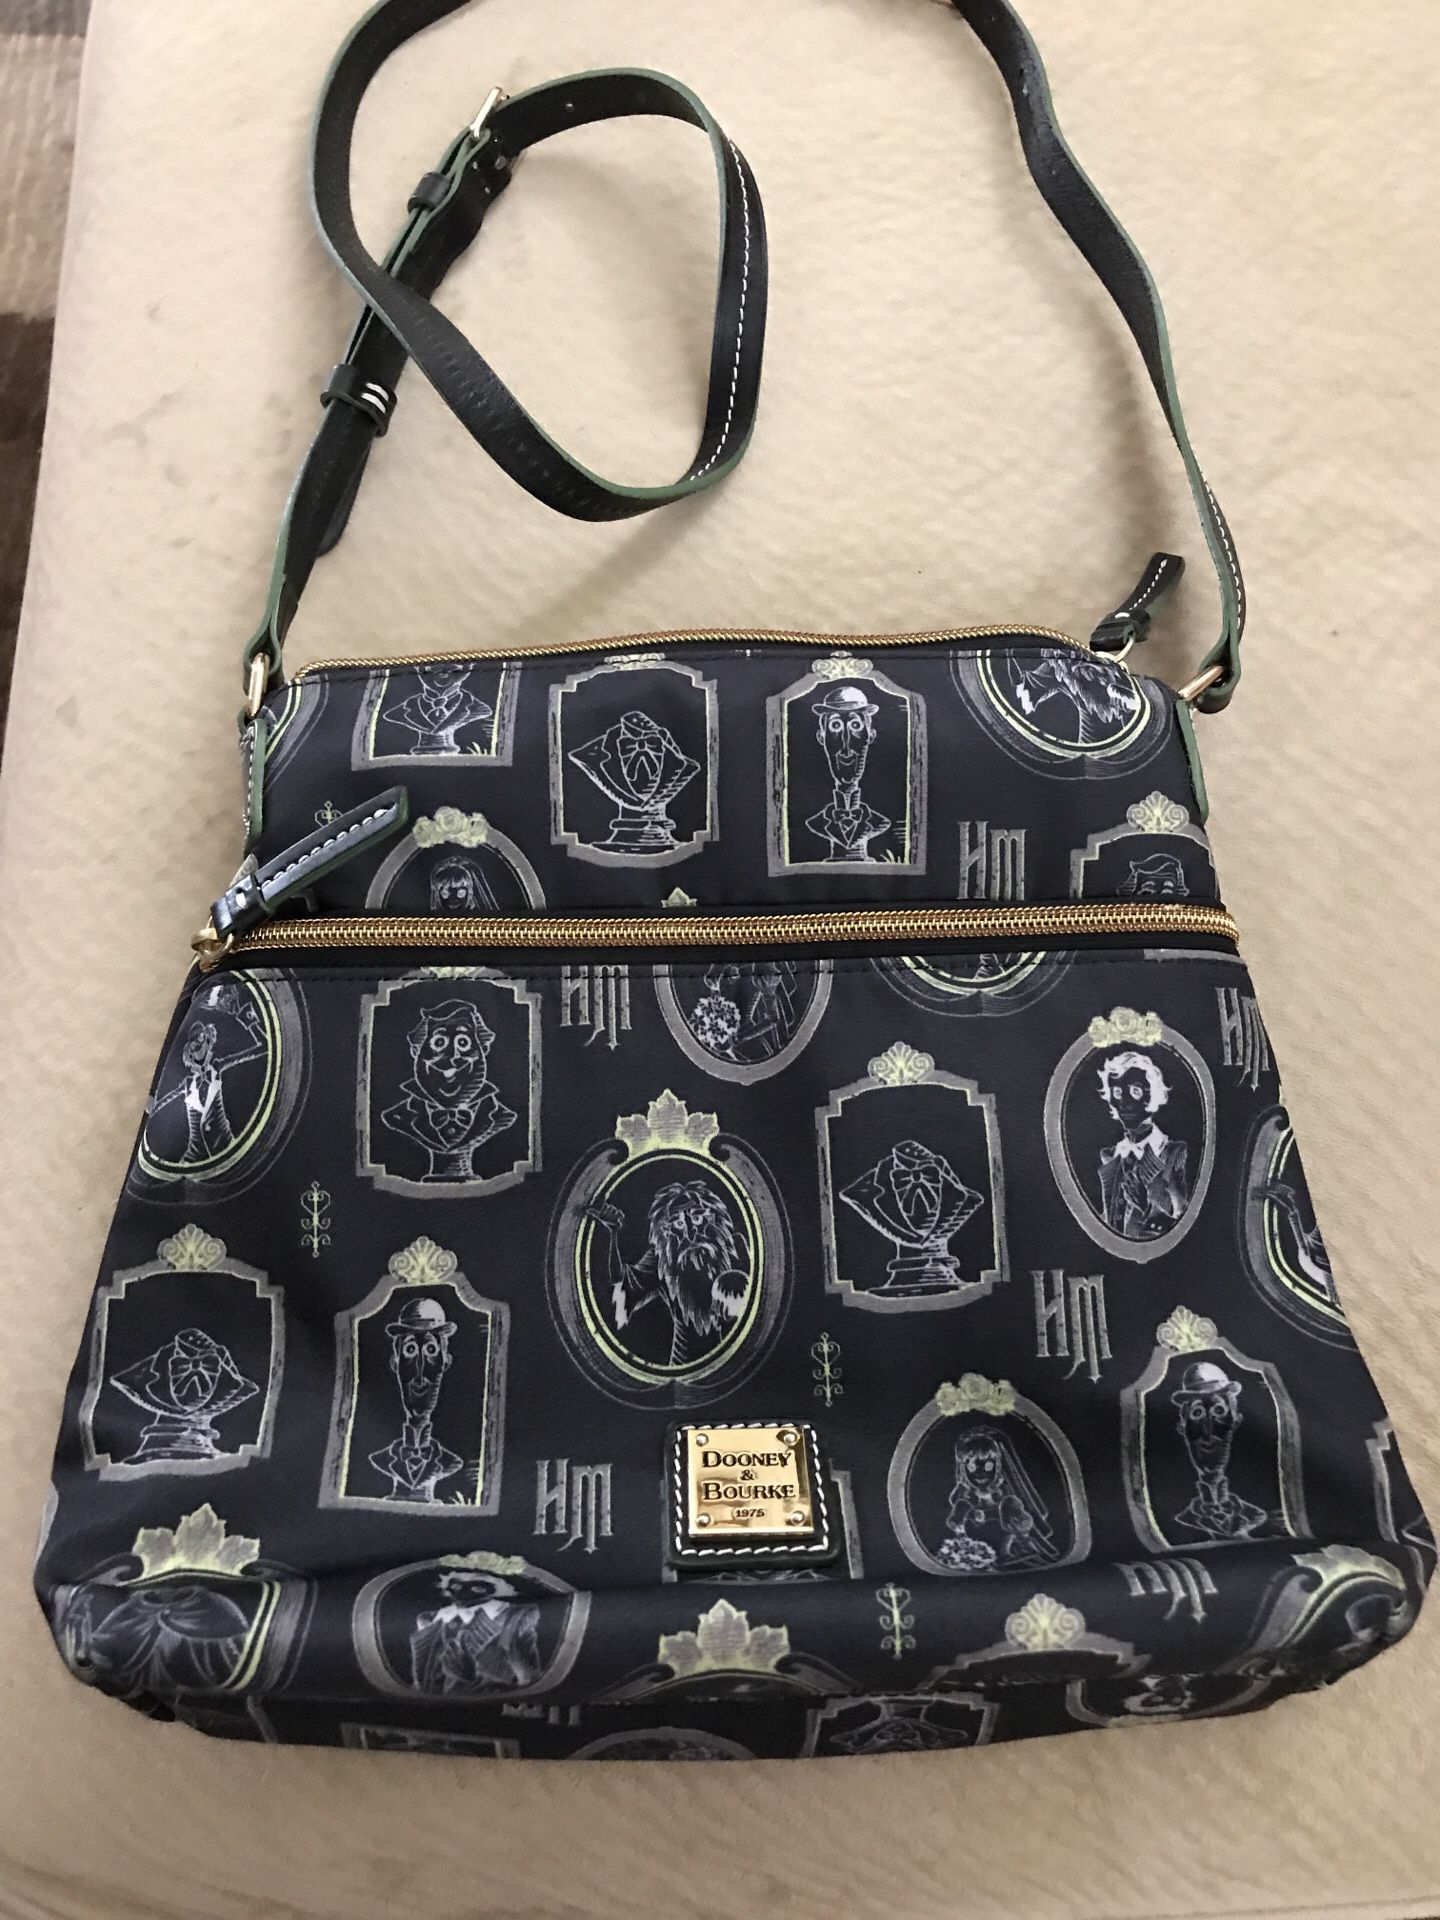 Dooney and Bourke haunted mansion